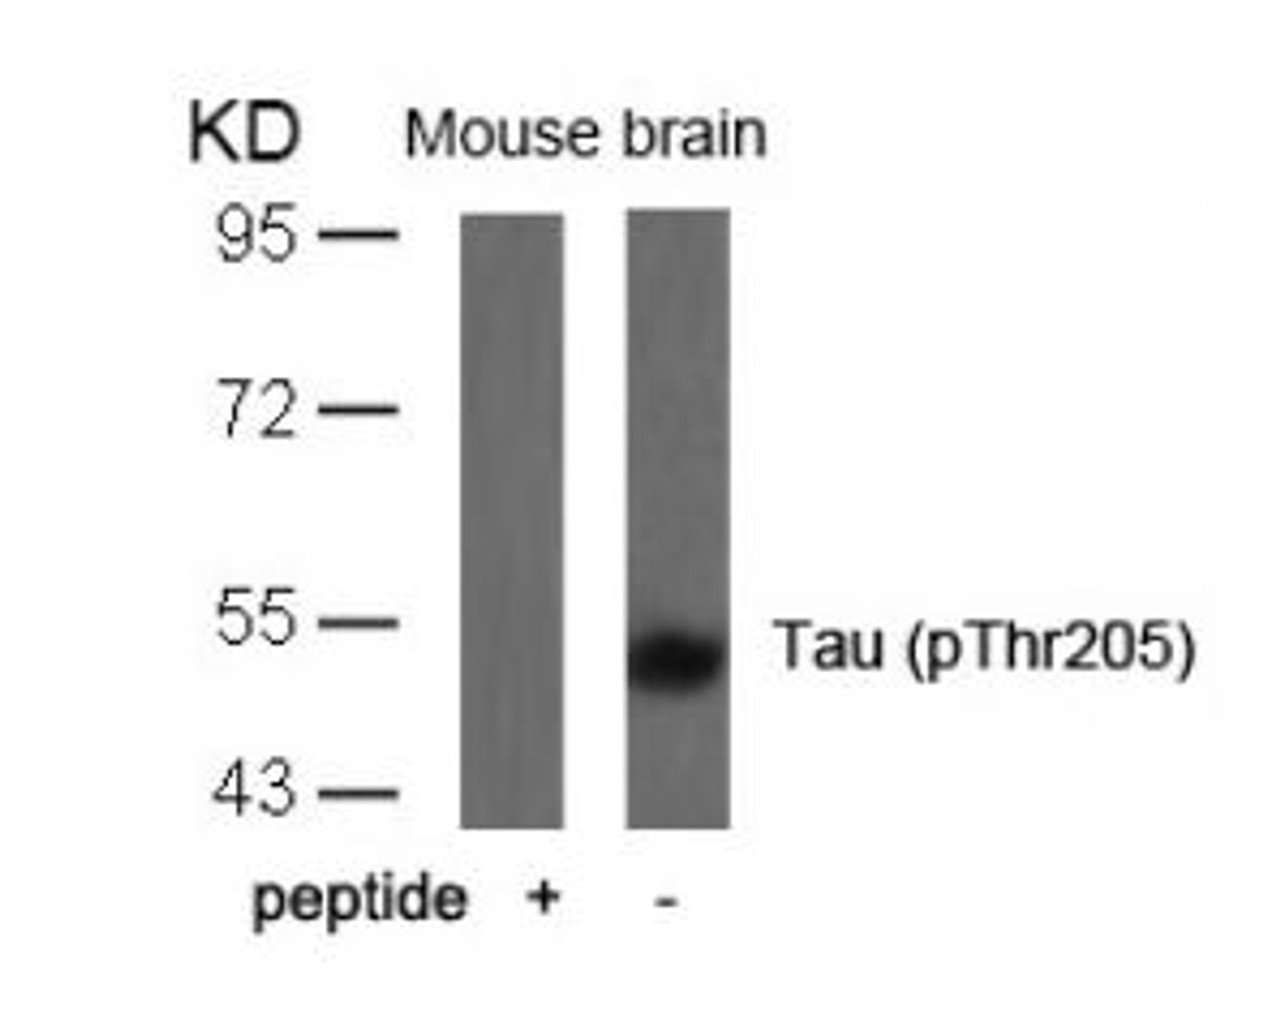 Western blot analysis of lysed extracts from mouse brain tissue using Tau (Phospho-Thr205) .